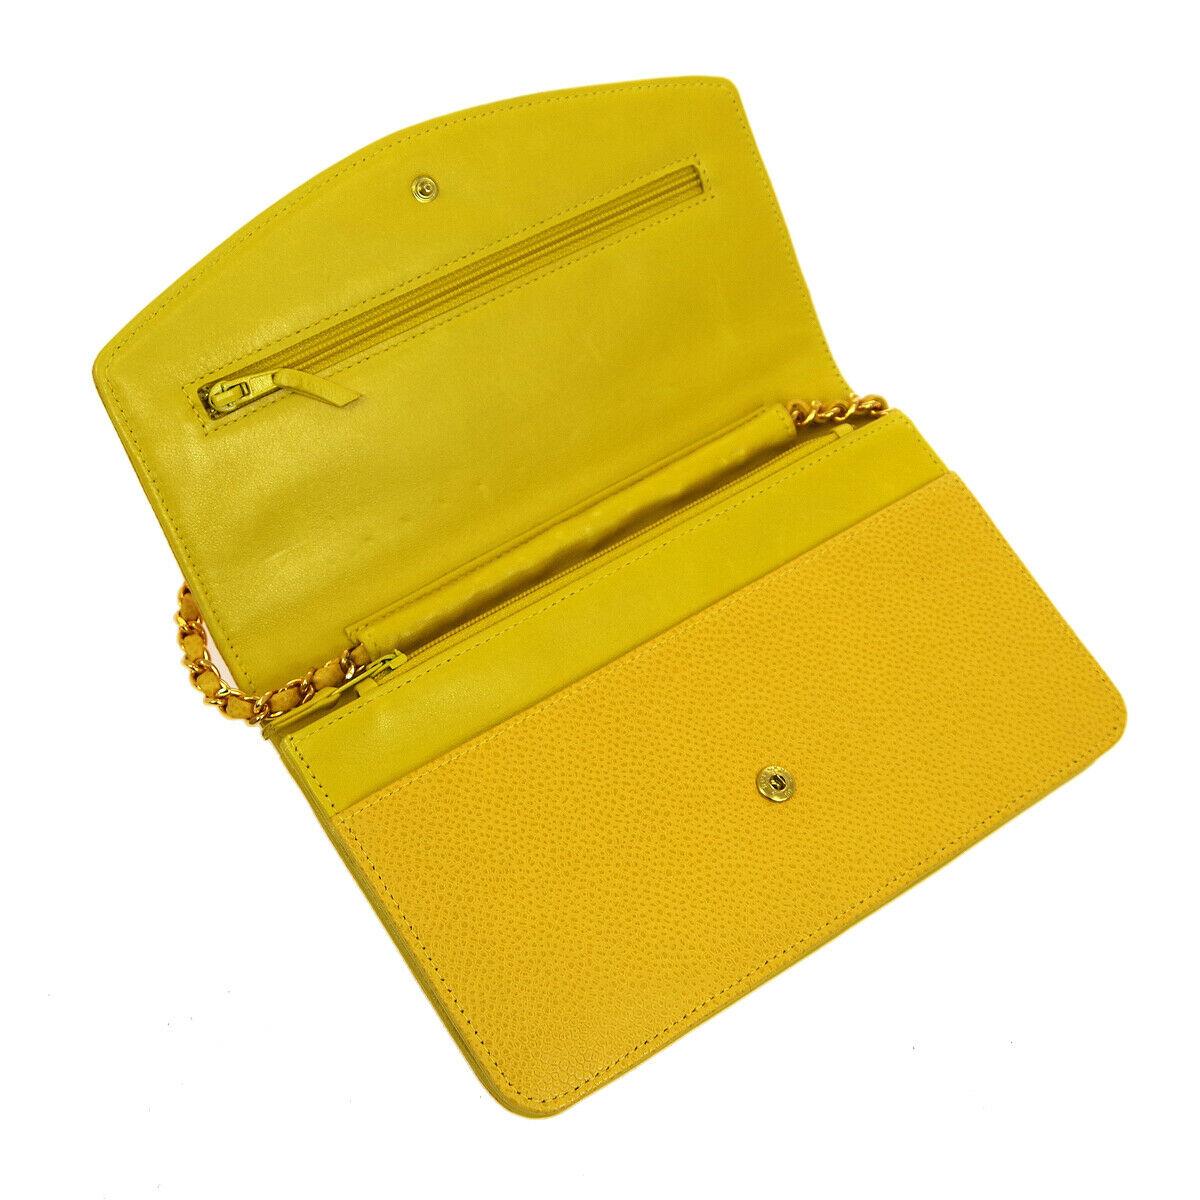 Chanel Yellow Leather Gold Small Evening Wallet on Chain WOC Shoulder Flap Bag in Box

Leather
Gold tone hardware
Wove lining
Snap closure
Made in France
Date code present
Shoulder strap drop 23.5